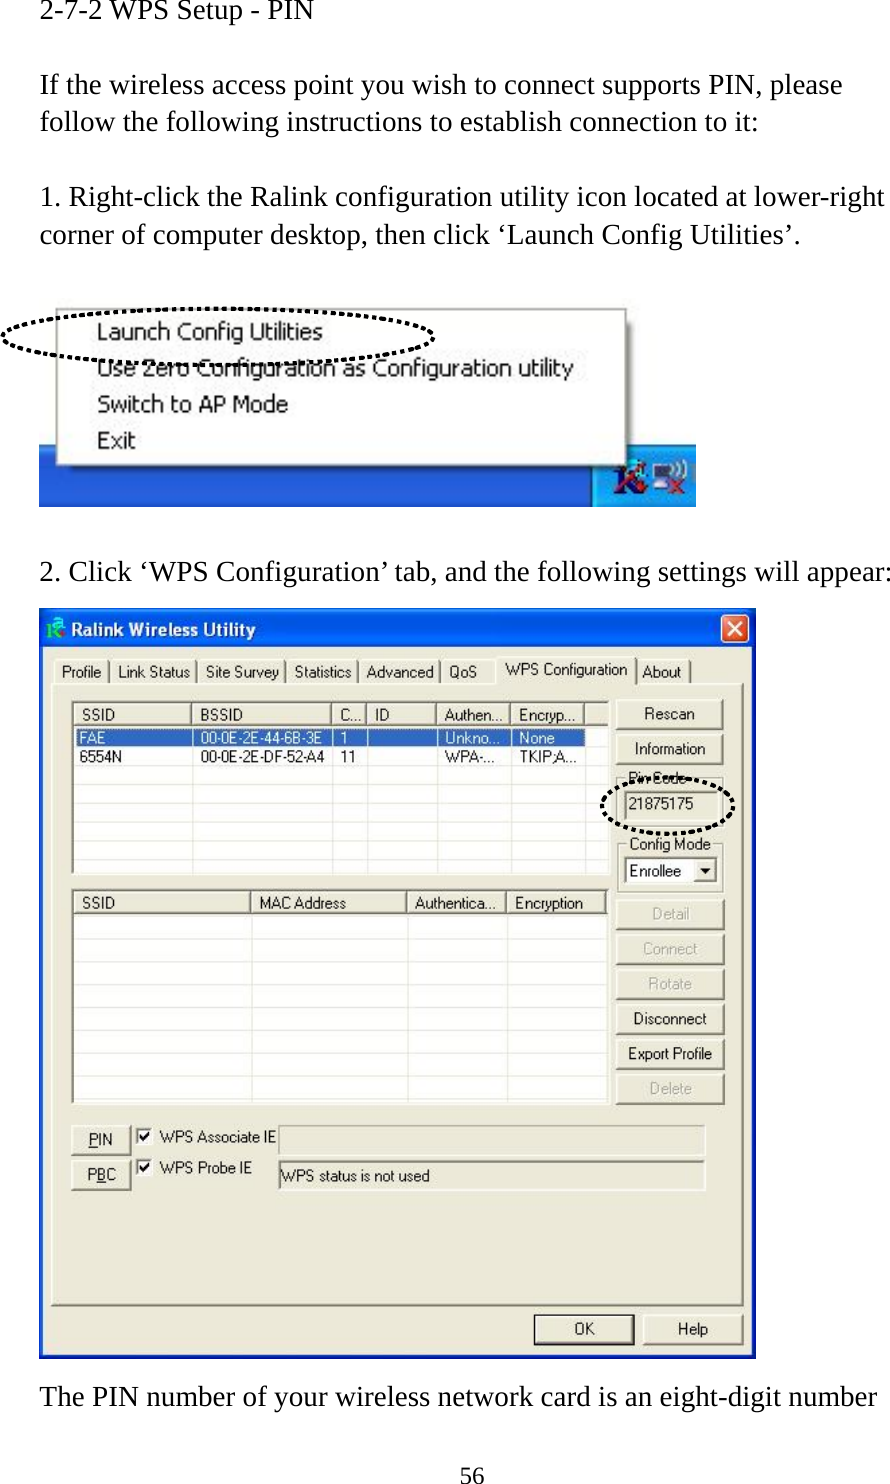  562-7-2 WPS Setup - PIN  If the wireless access point you wish to connect supports PIN, please follow the following instructions to establish connection to it:  1. Right-click the Ralink configuration utility icon located at lower-right corner of computer desktop, then click ‘Launch Config Utilities’.    2. Click ‘WPS Configuration’ tab, and the following settings will appear:  The PIN number of your wireless network card is an eight-digit number 